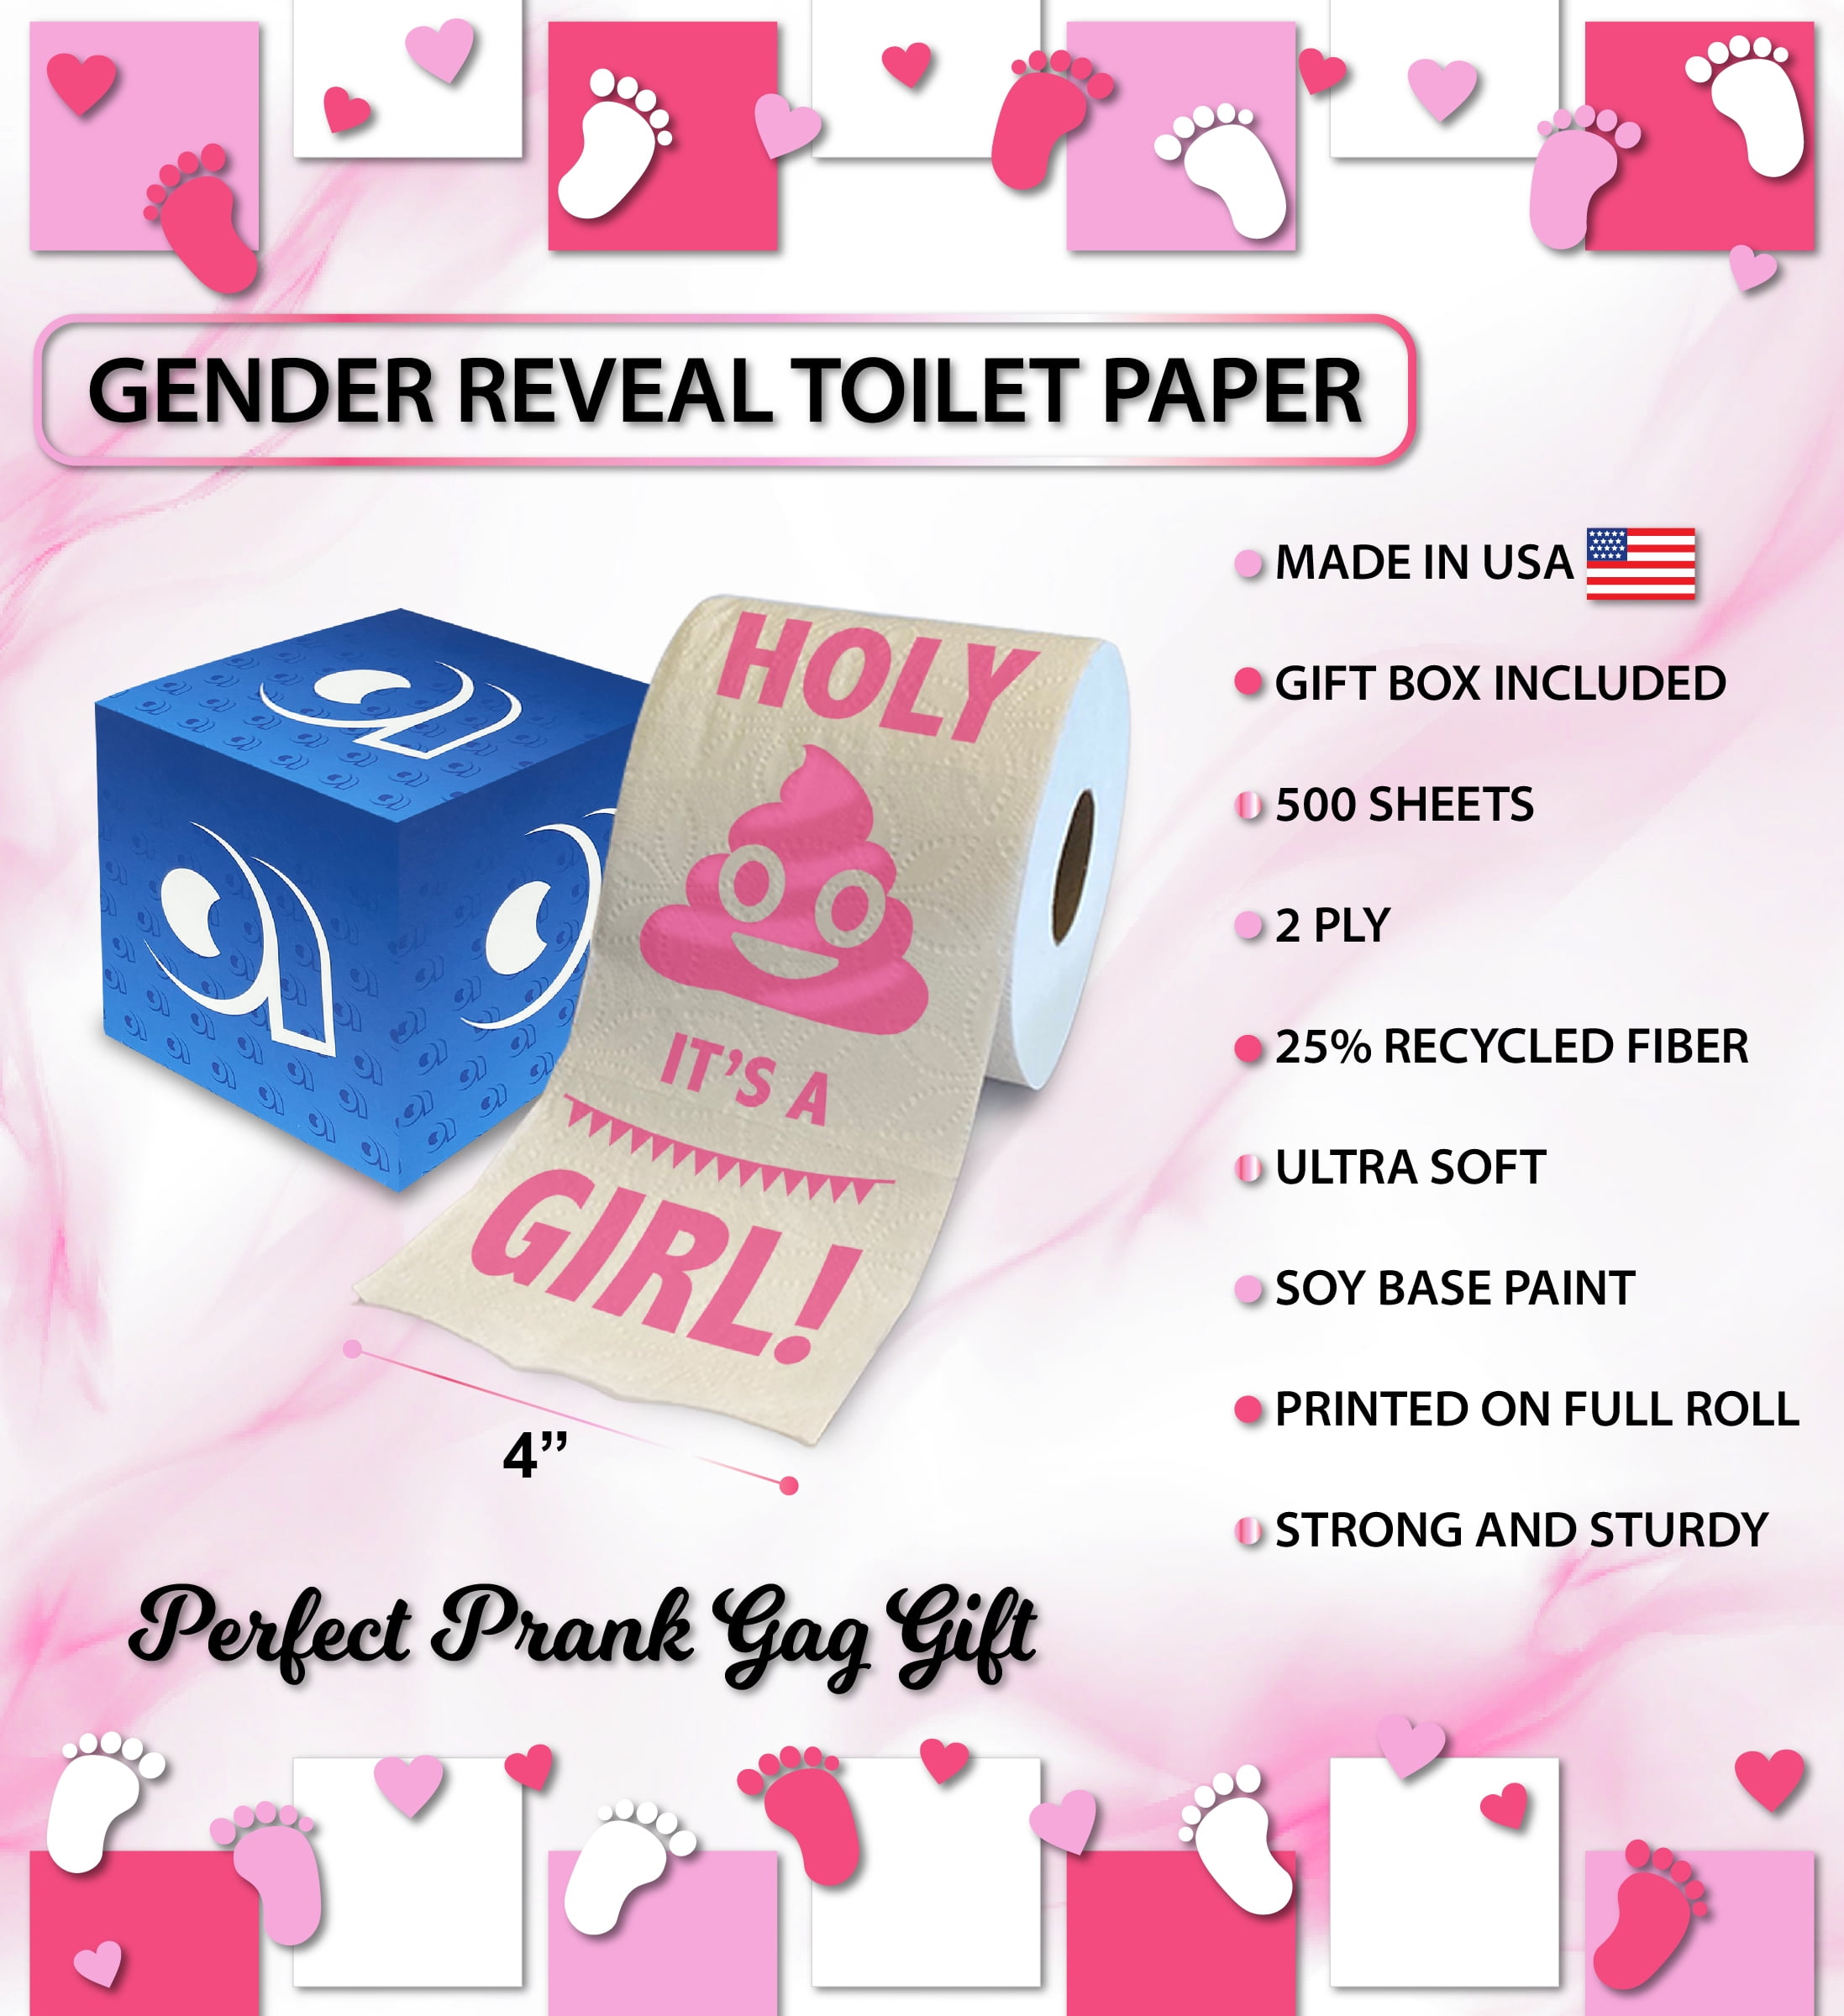 Printed TP Holy Poop It's a Girl! Printed Toilet Paper Gag Gift – Funny  Roll for Girl Baby Shower Party Favors, Prank, Gender Reveal, Novelty  Surprise